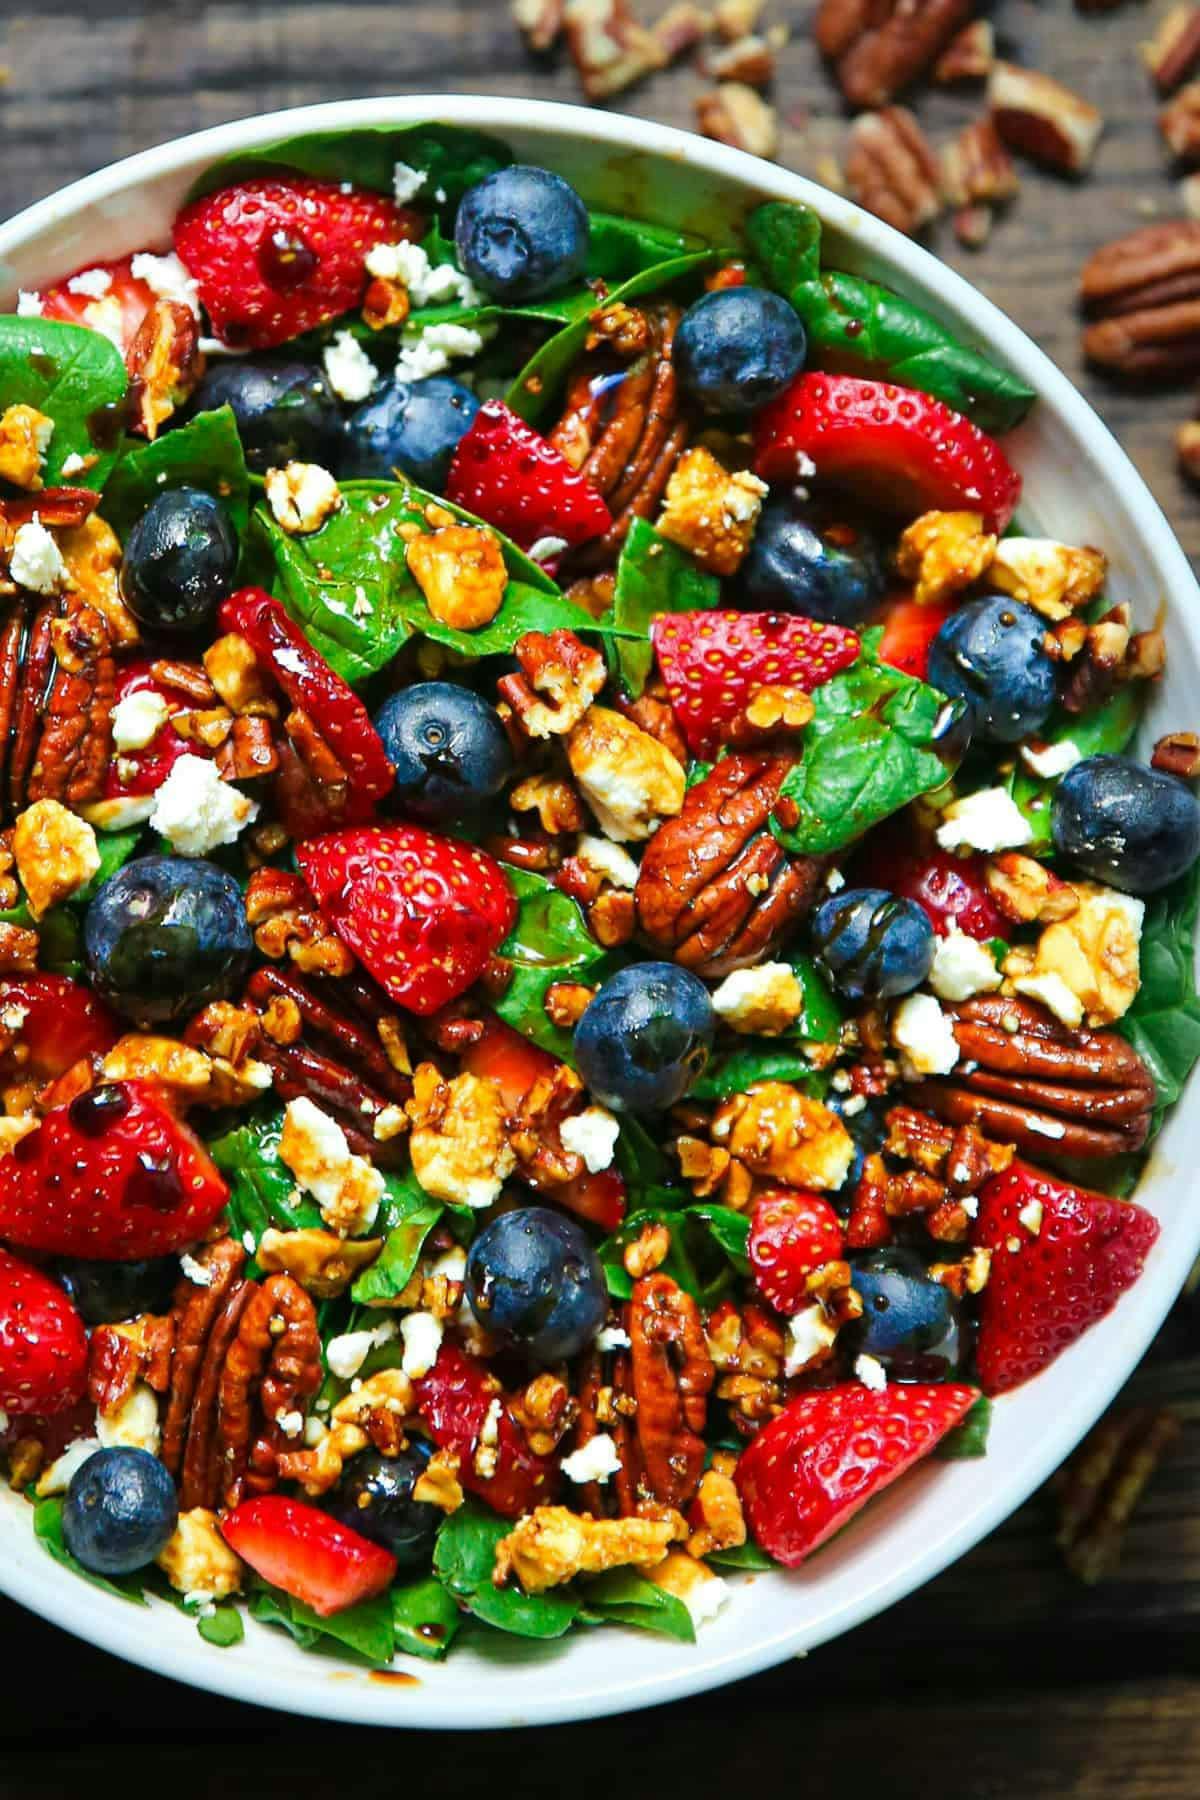 Strawberry Spinach Salad with Blueberries, Pecans, Feta Cheese, and Balsamic Glaze